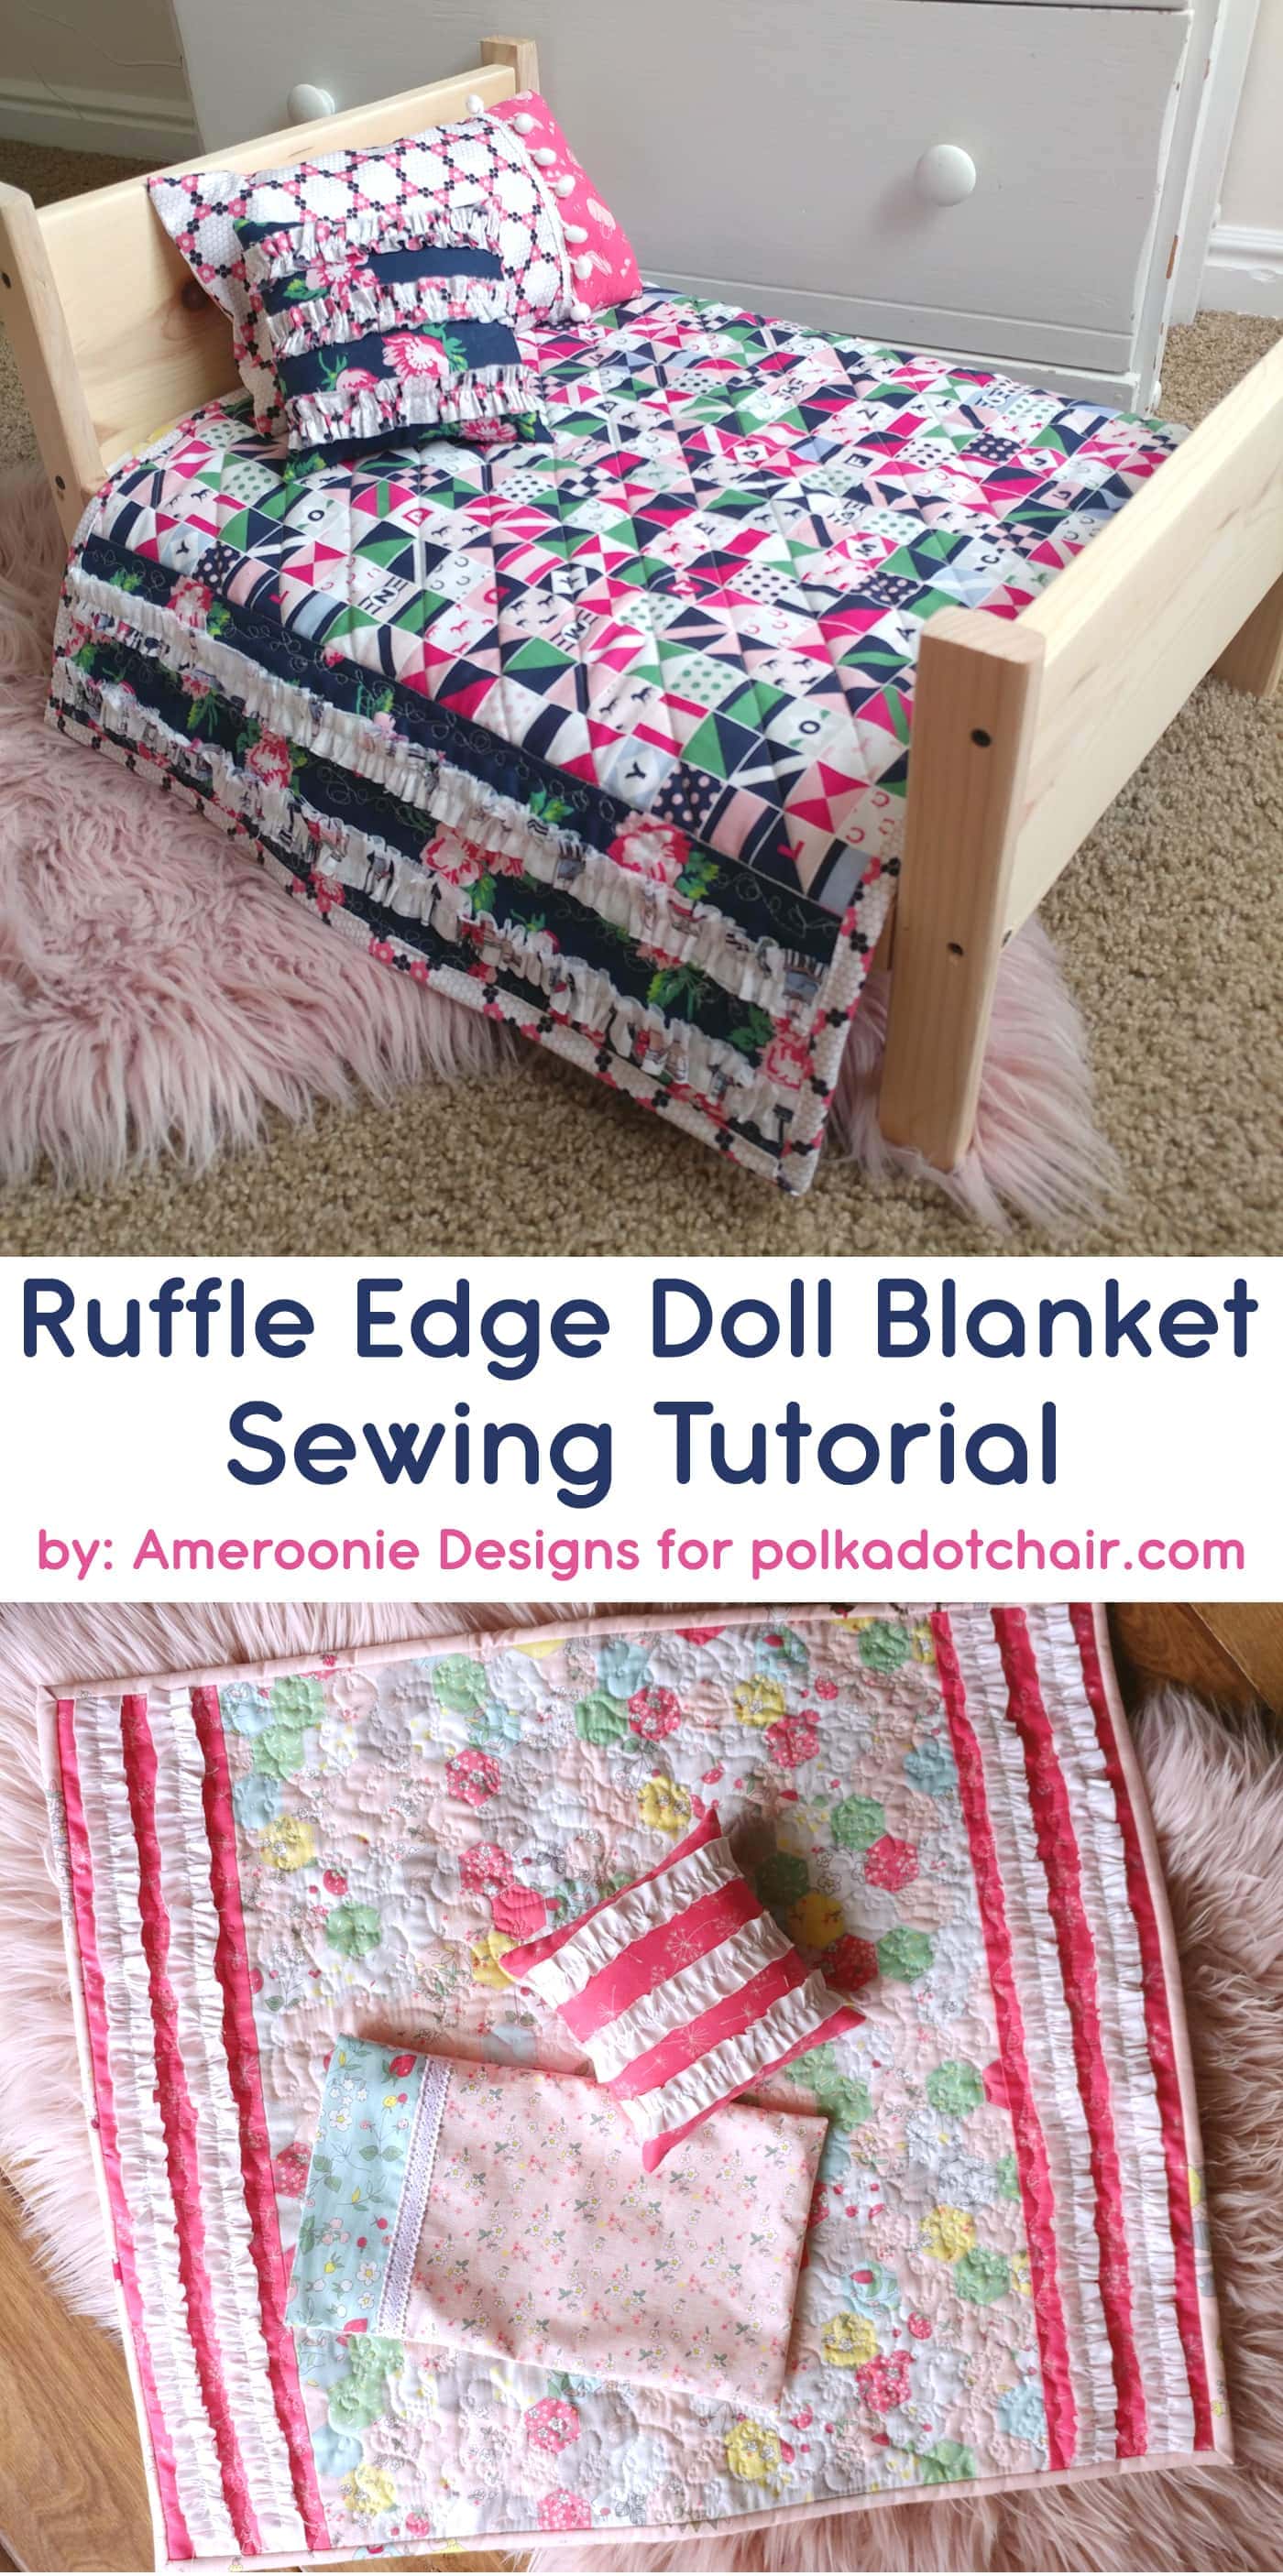 Ruffle Edge Doll Quilt tutorial - learn how to sew a simple doll blanket or quilt #dollquilt #quilting #quilttutorial #dollblanket #DIY #sewingtutorials 